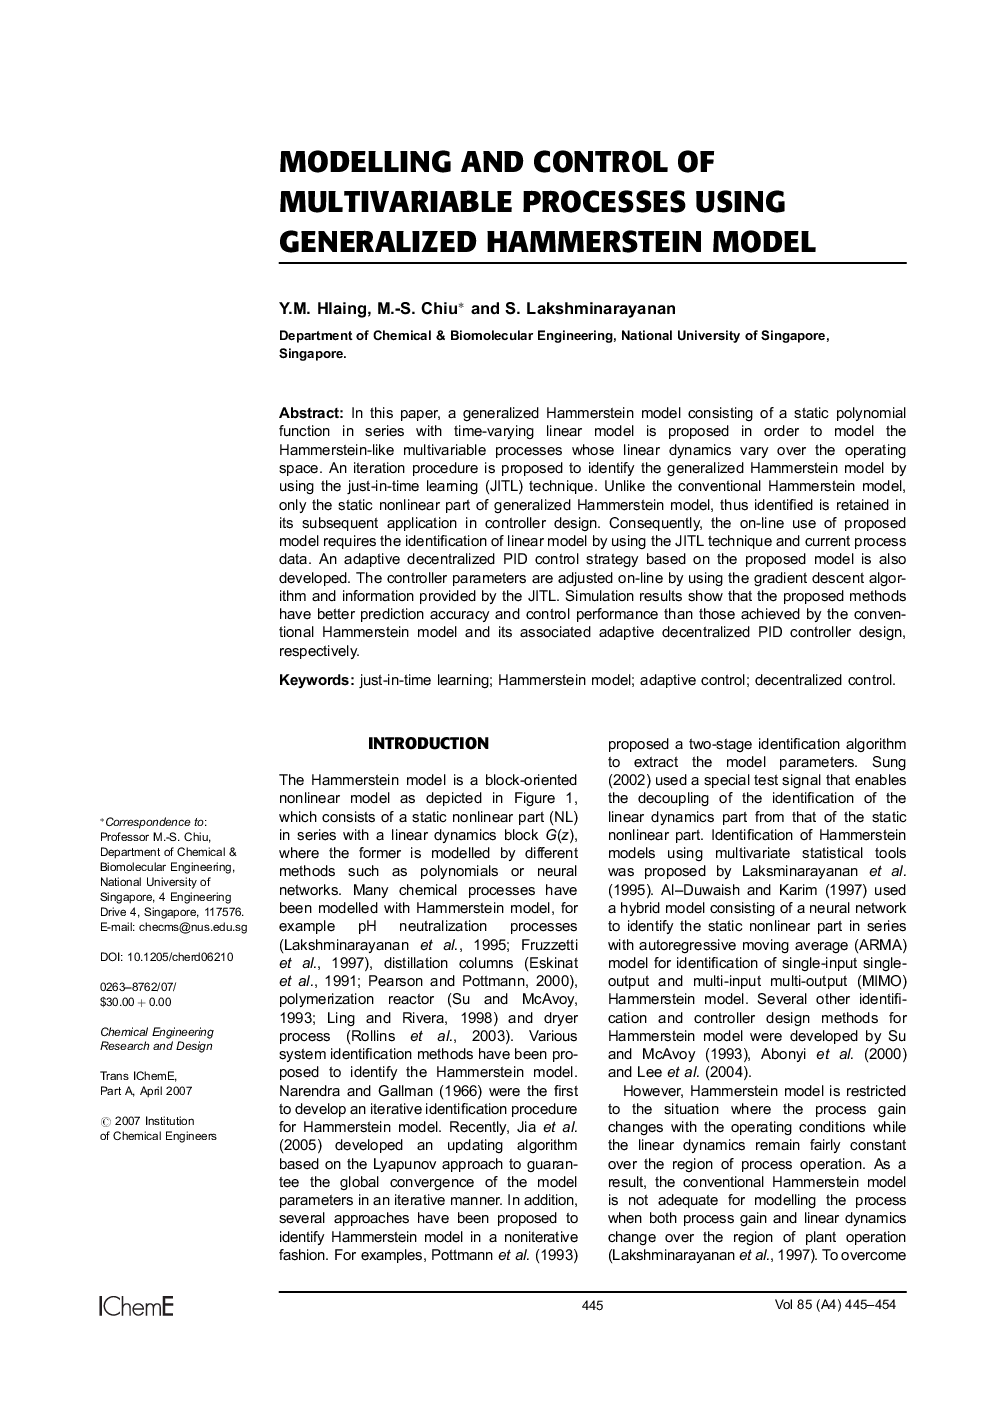 Modelling and Control of Multivariable Processes Using Generalized Hammerstein Model